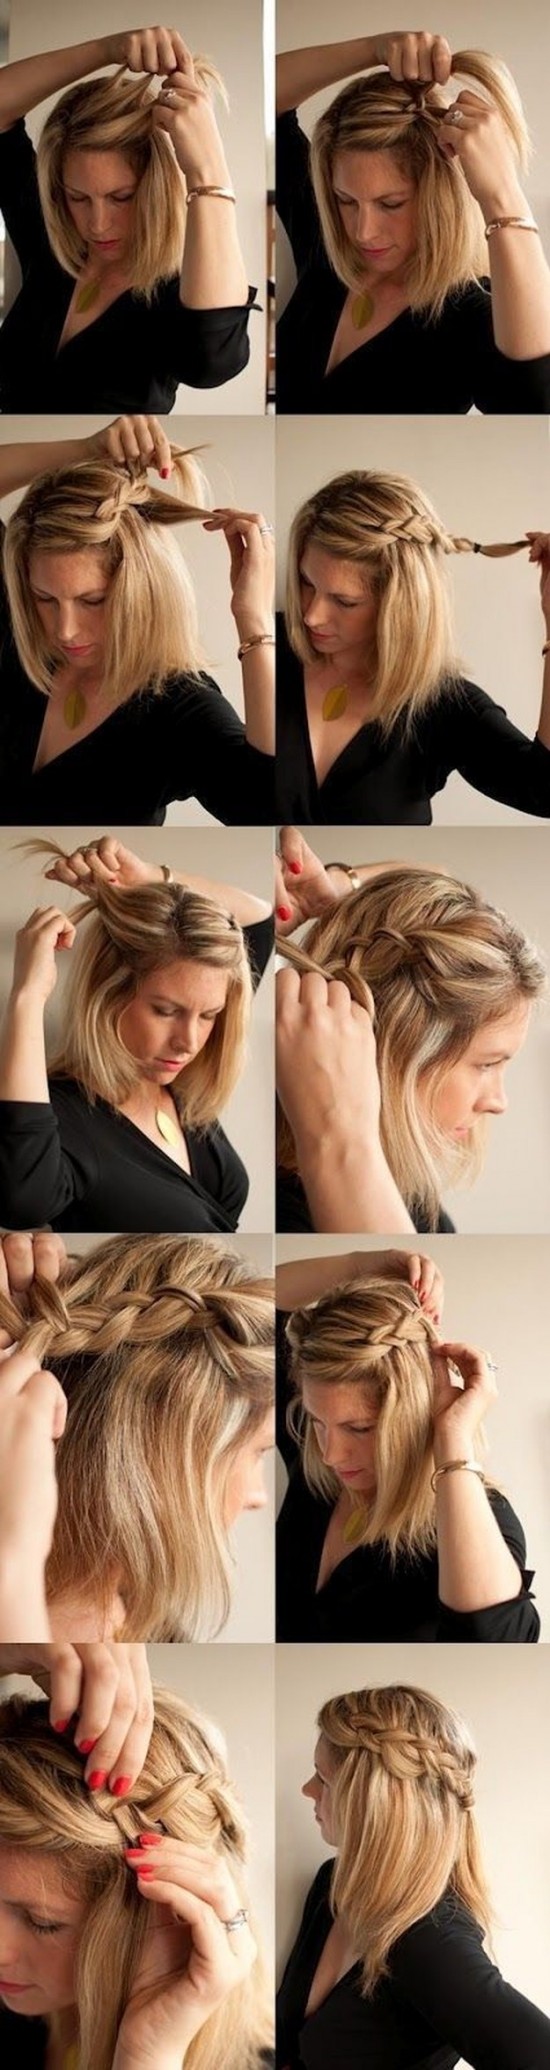 Creative Hairstyles That You Can Easily Do at Home (27 Photos) - FunCage